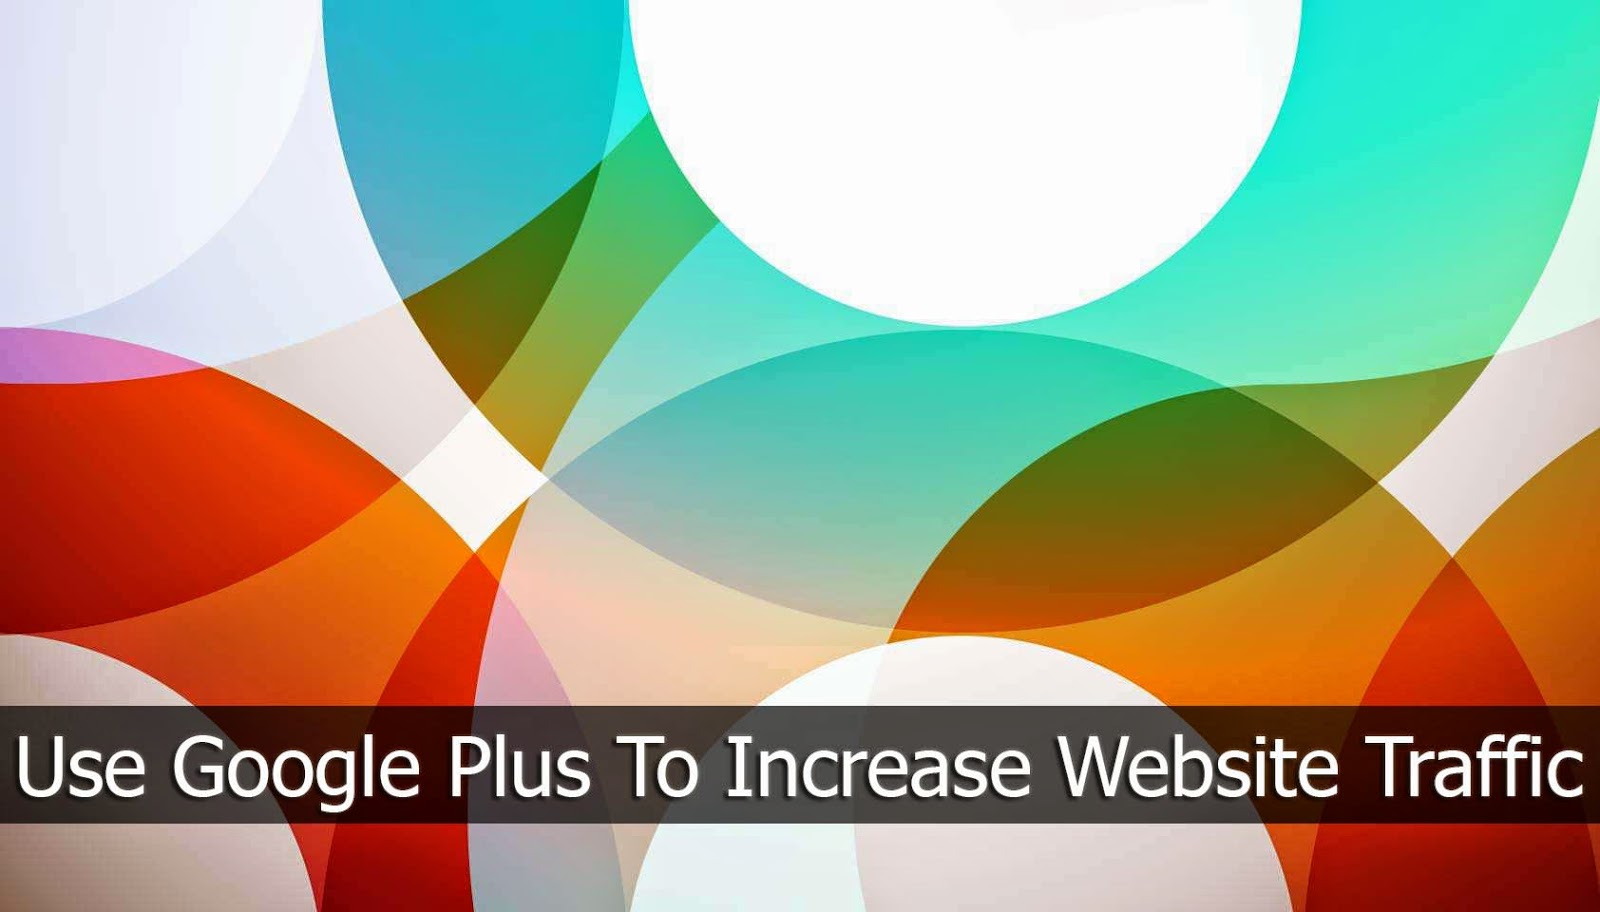 How To Use Google Plus To Increase Website Traffic?